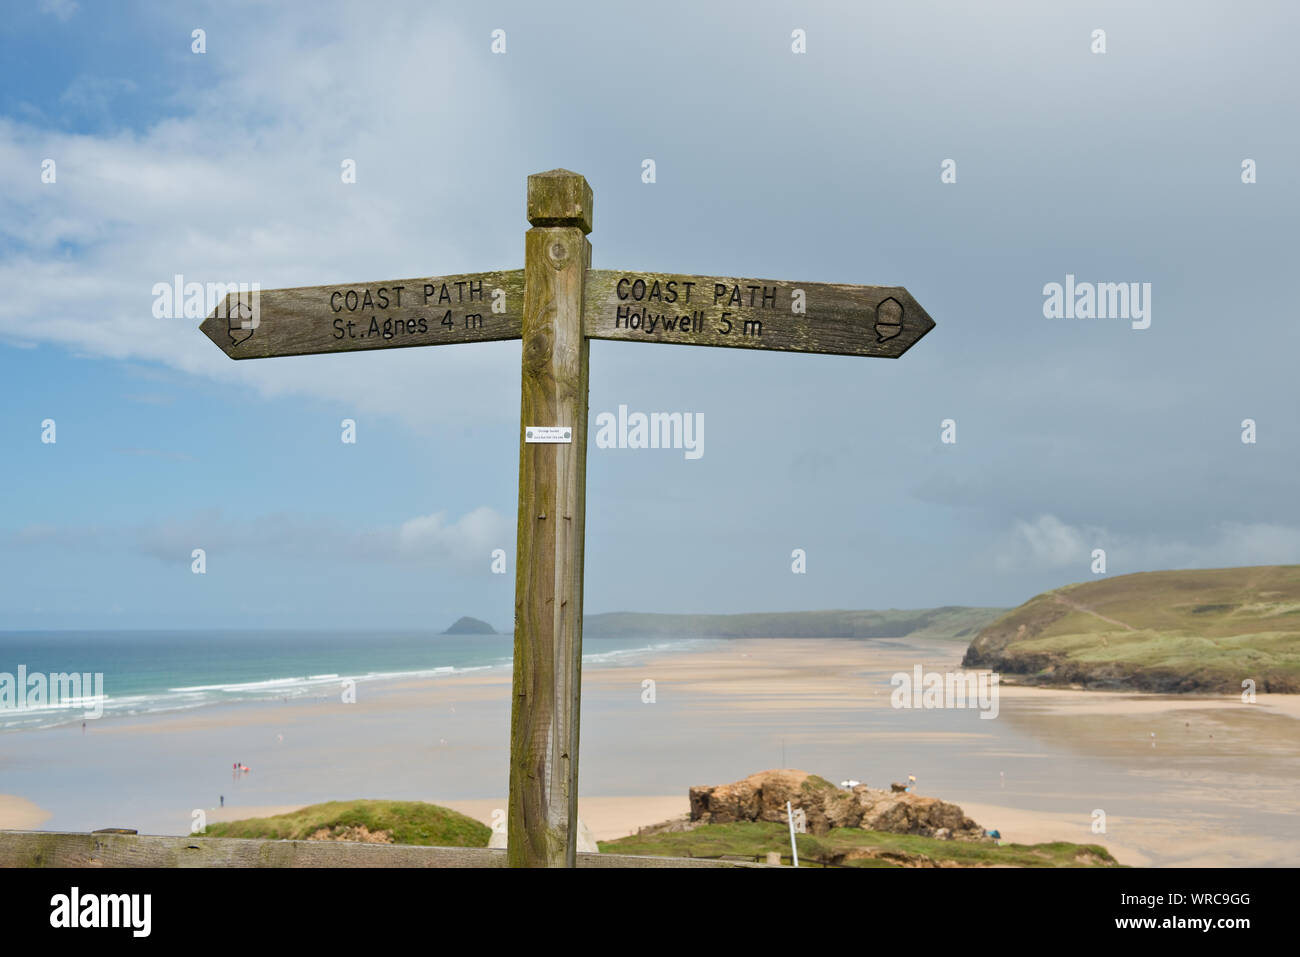 Coastal footpath signs to Holywell and St Agnes. Cornwall landscape. Perranporth, Cornwall, England, UK Stock Photo